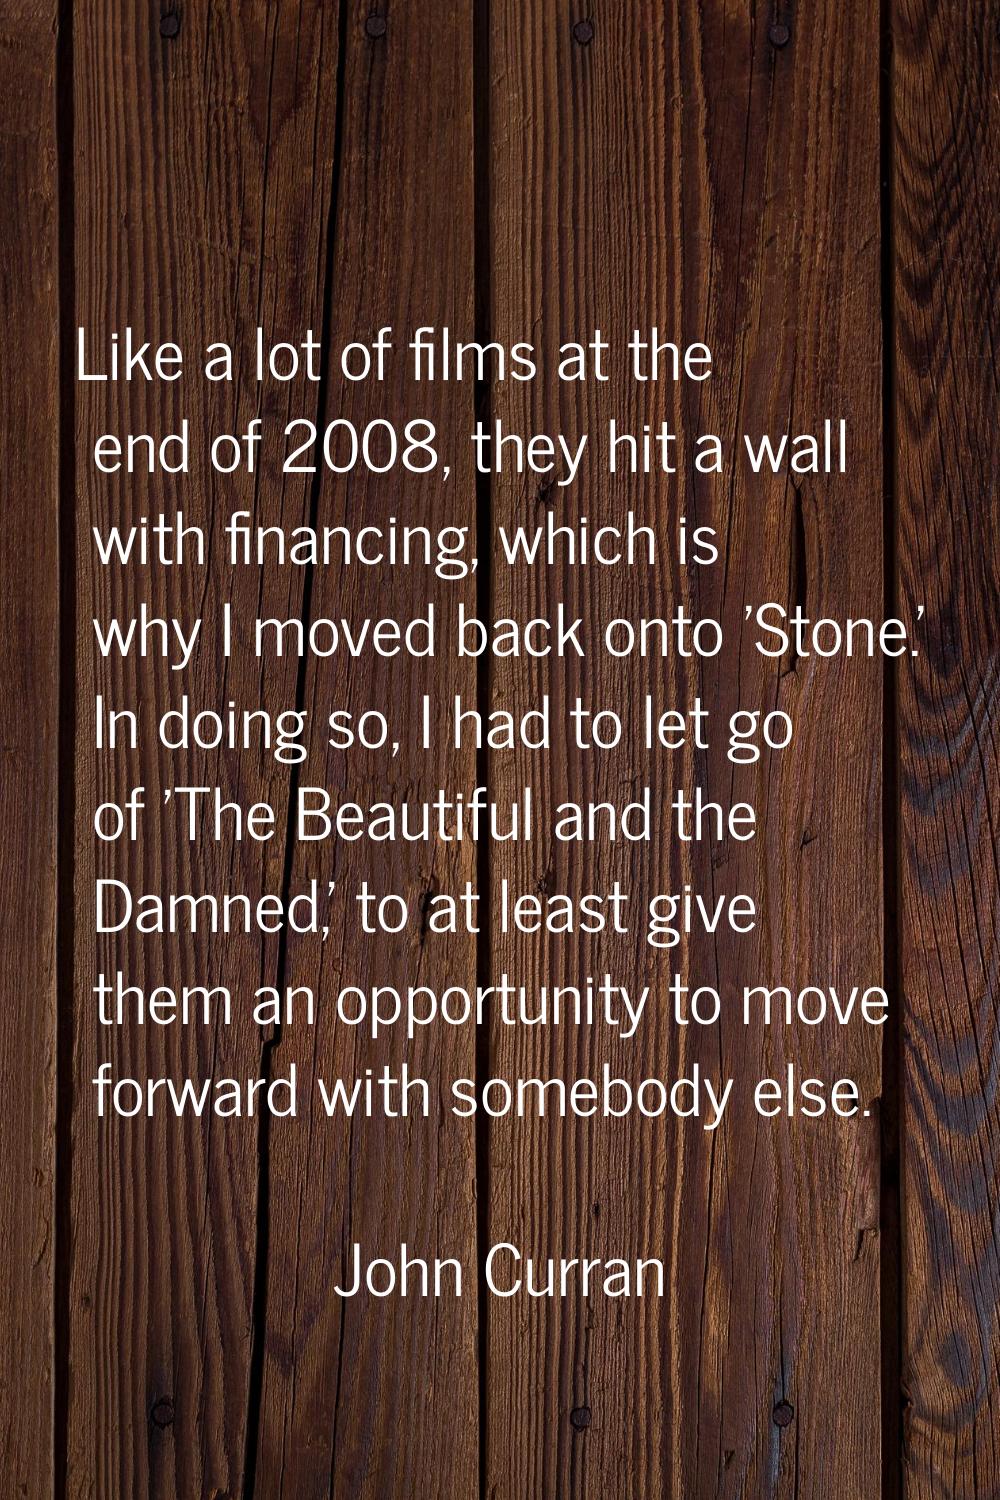 Like a lot of films at the end of 2008, they hit a wall with financing, which is why I moved back o